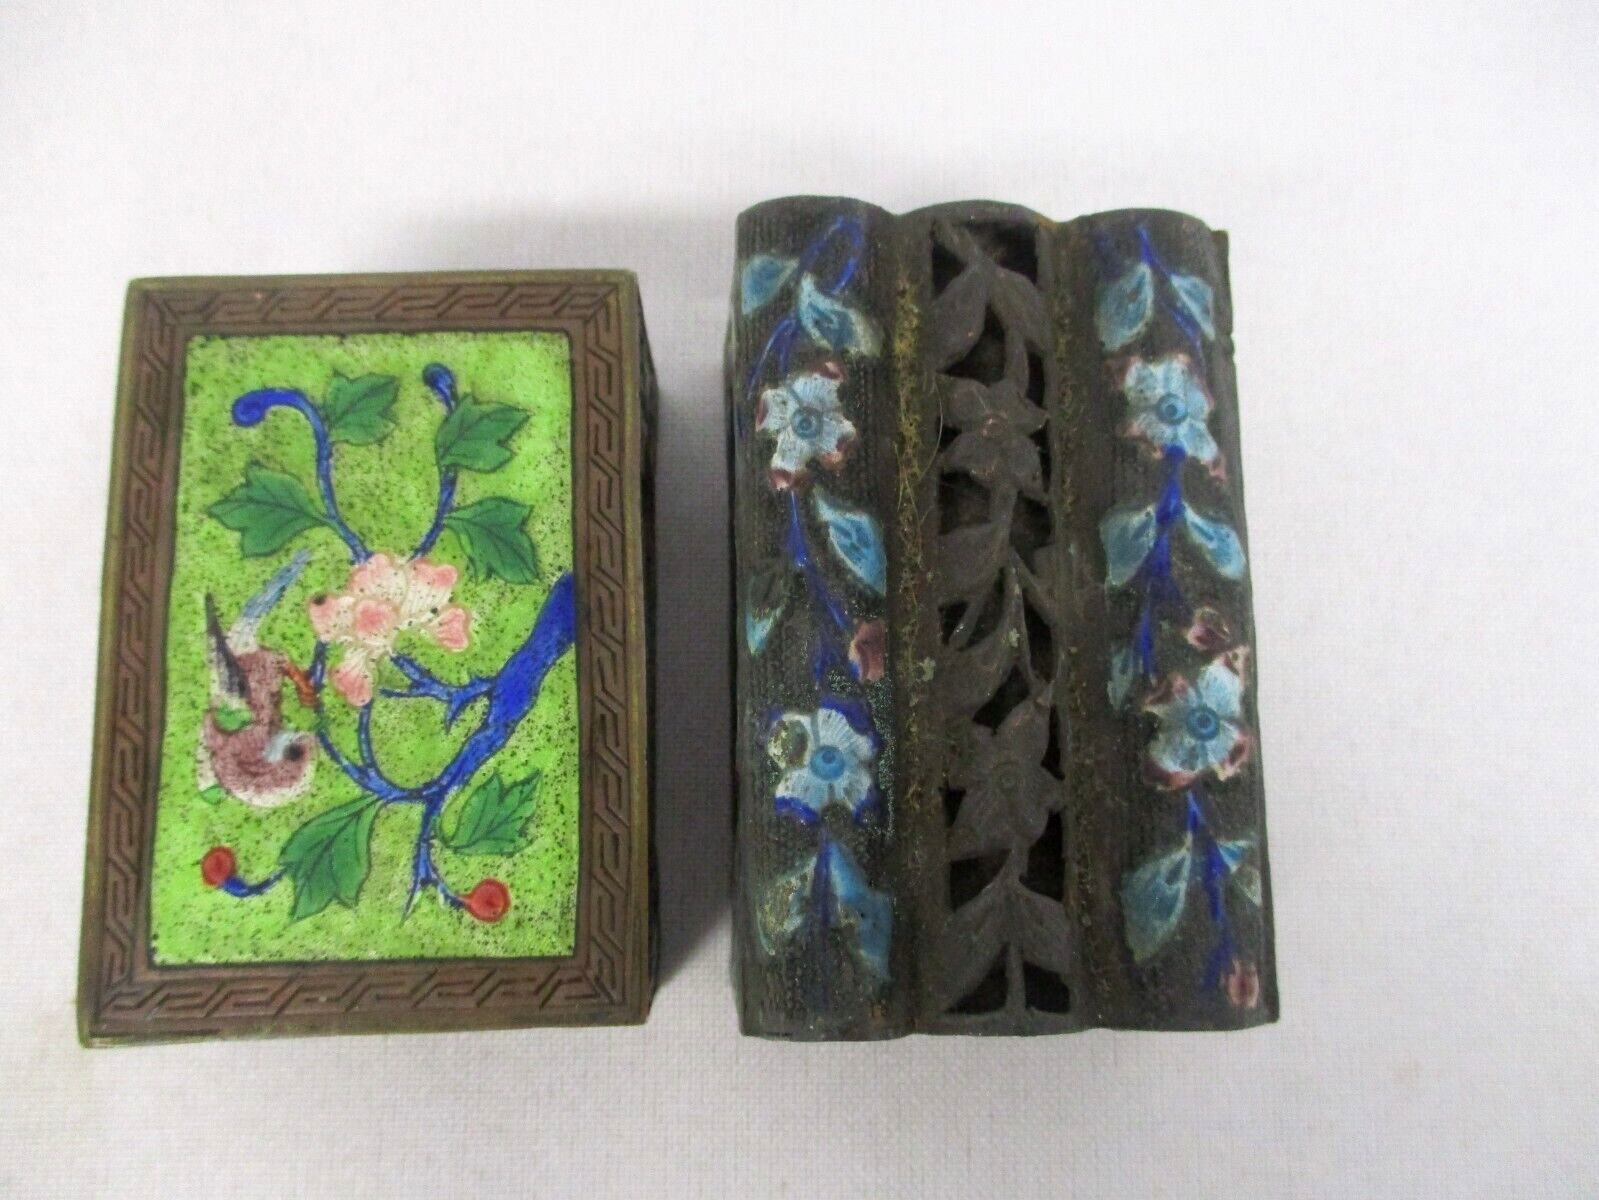 2 ANTIQUE CHINESE CLOISONNE ENAMEL MATCH BOX HOLDERS with BIRD & FLOWERS